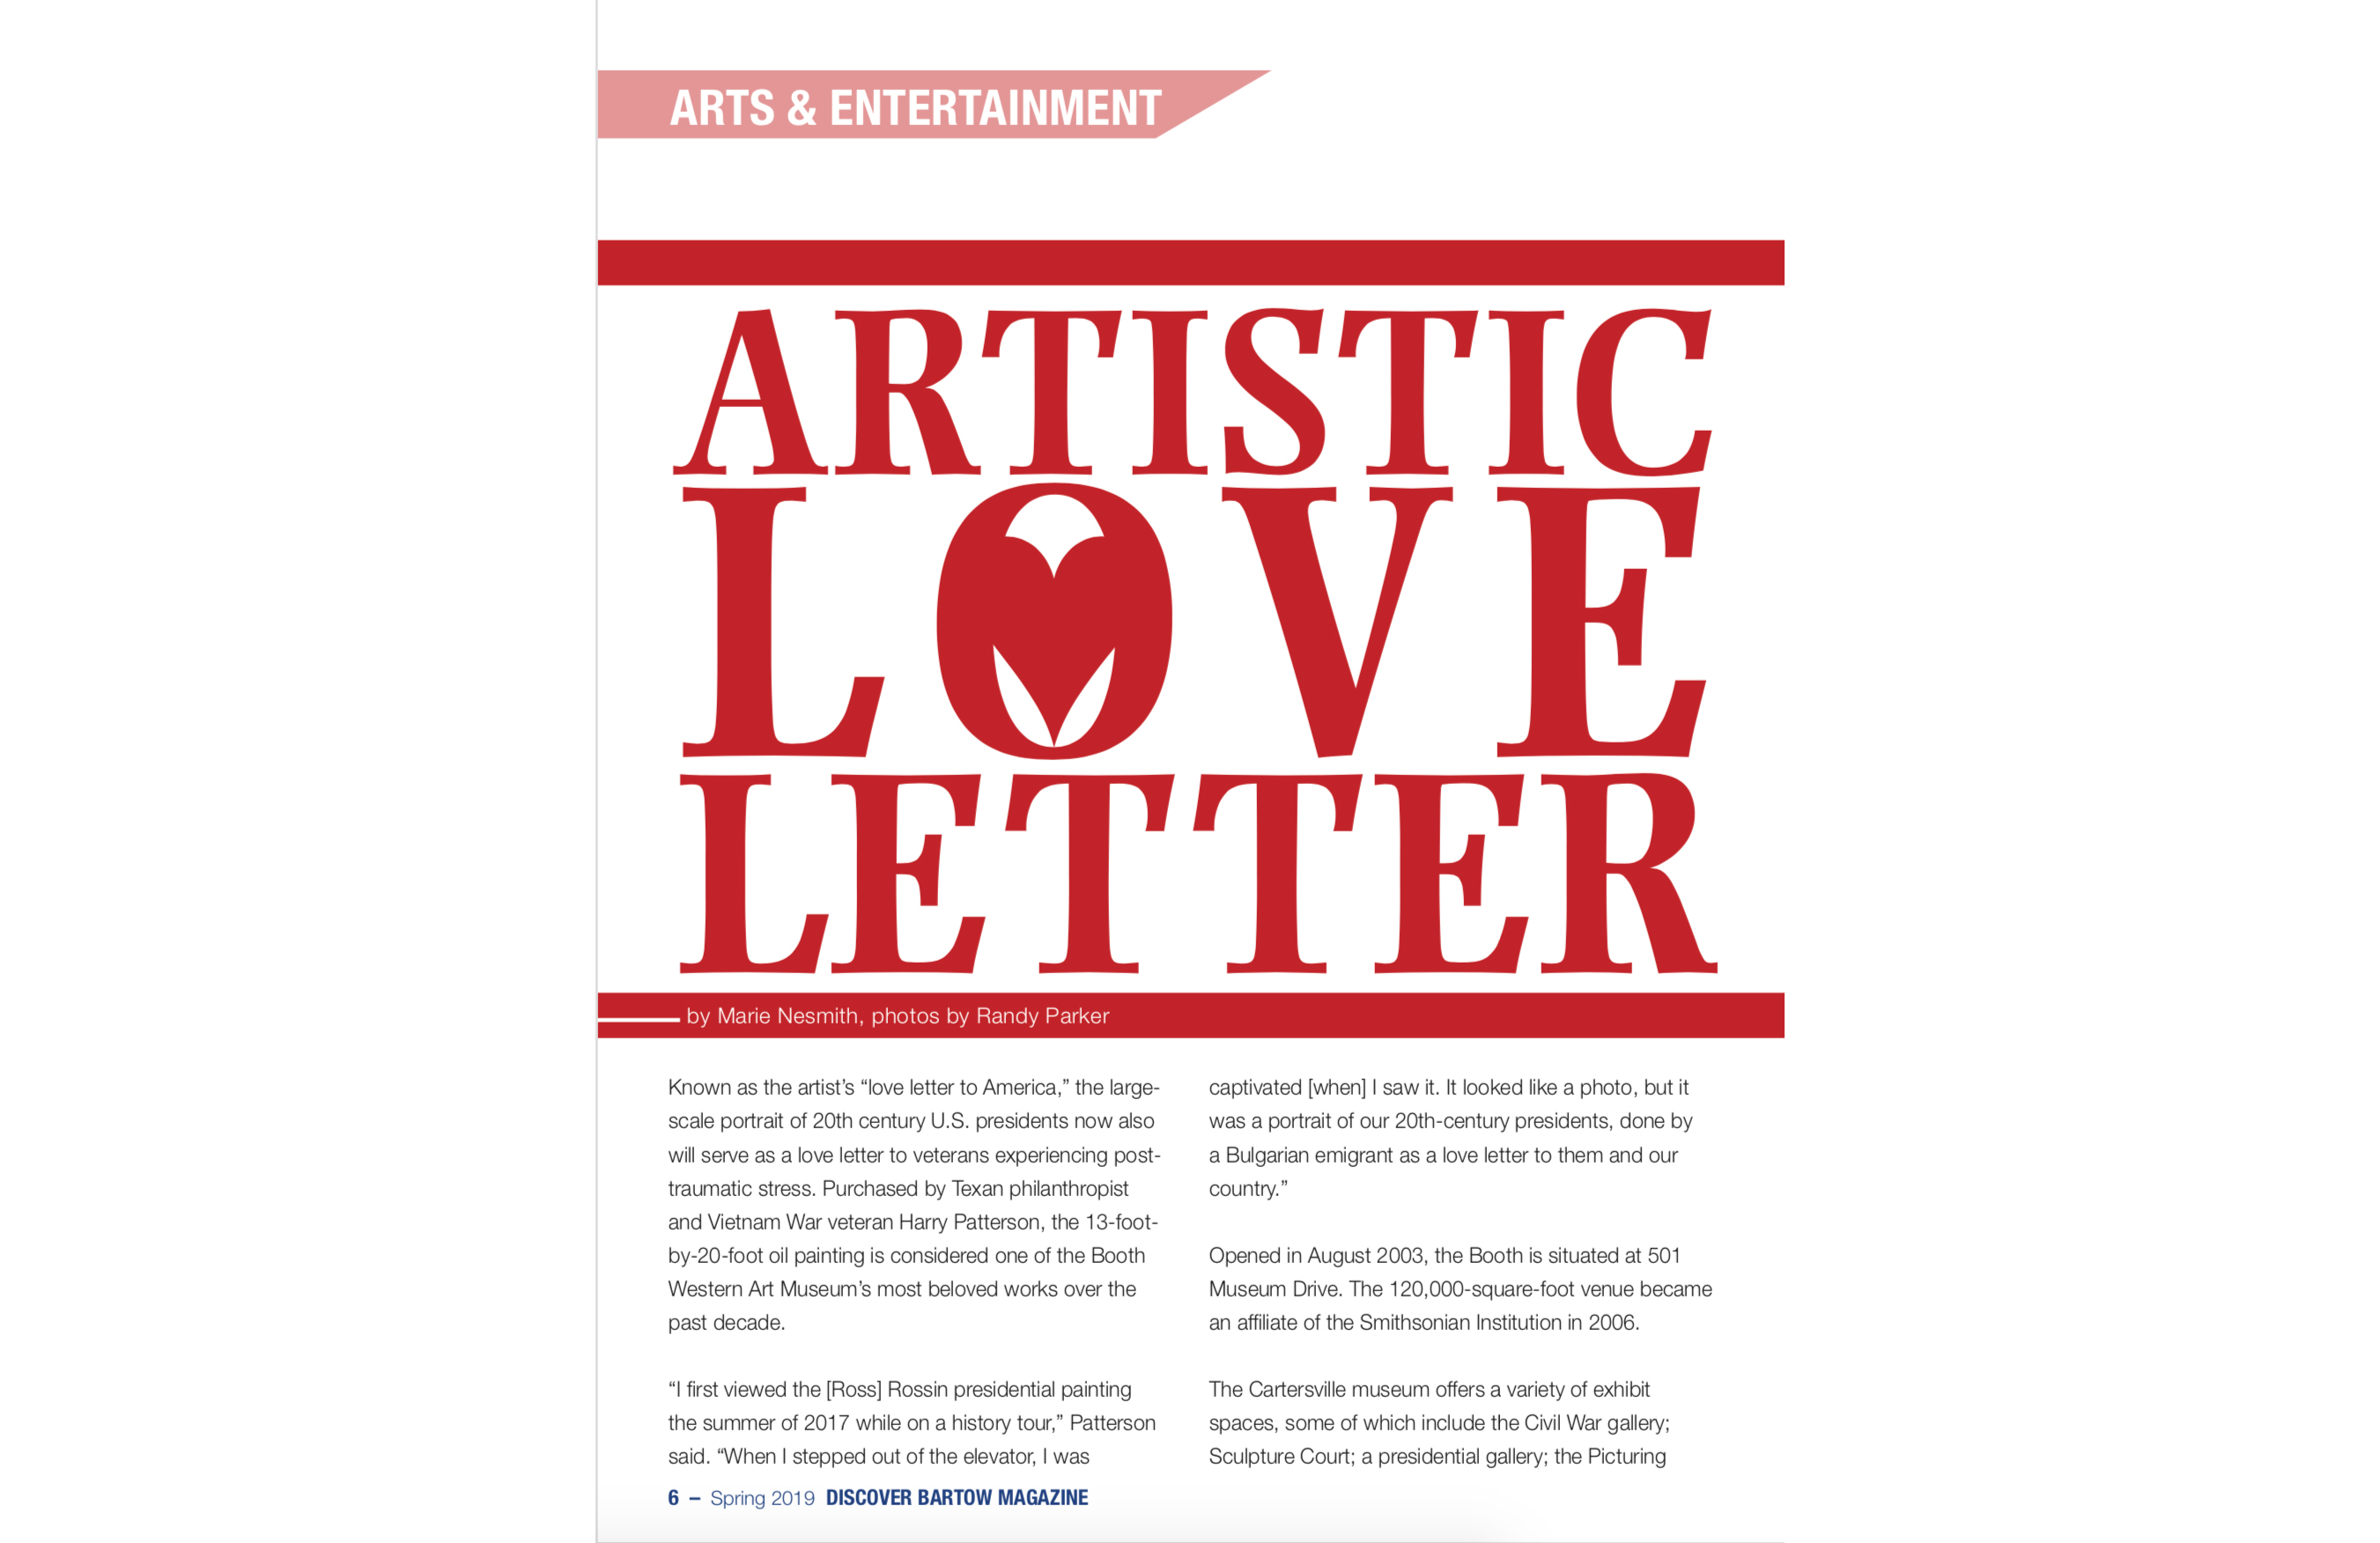 Artistic Love Letter, Spring 2019 Discover Bartow Magazine